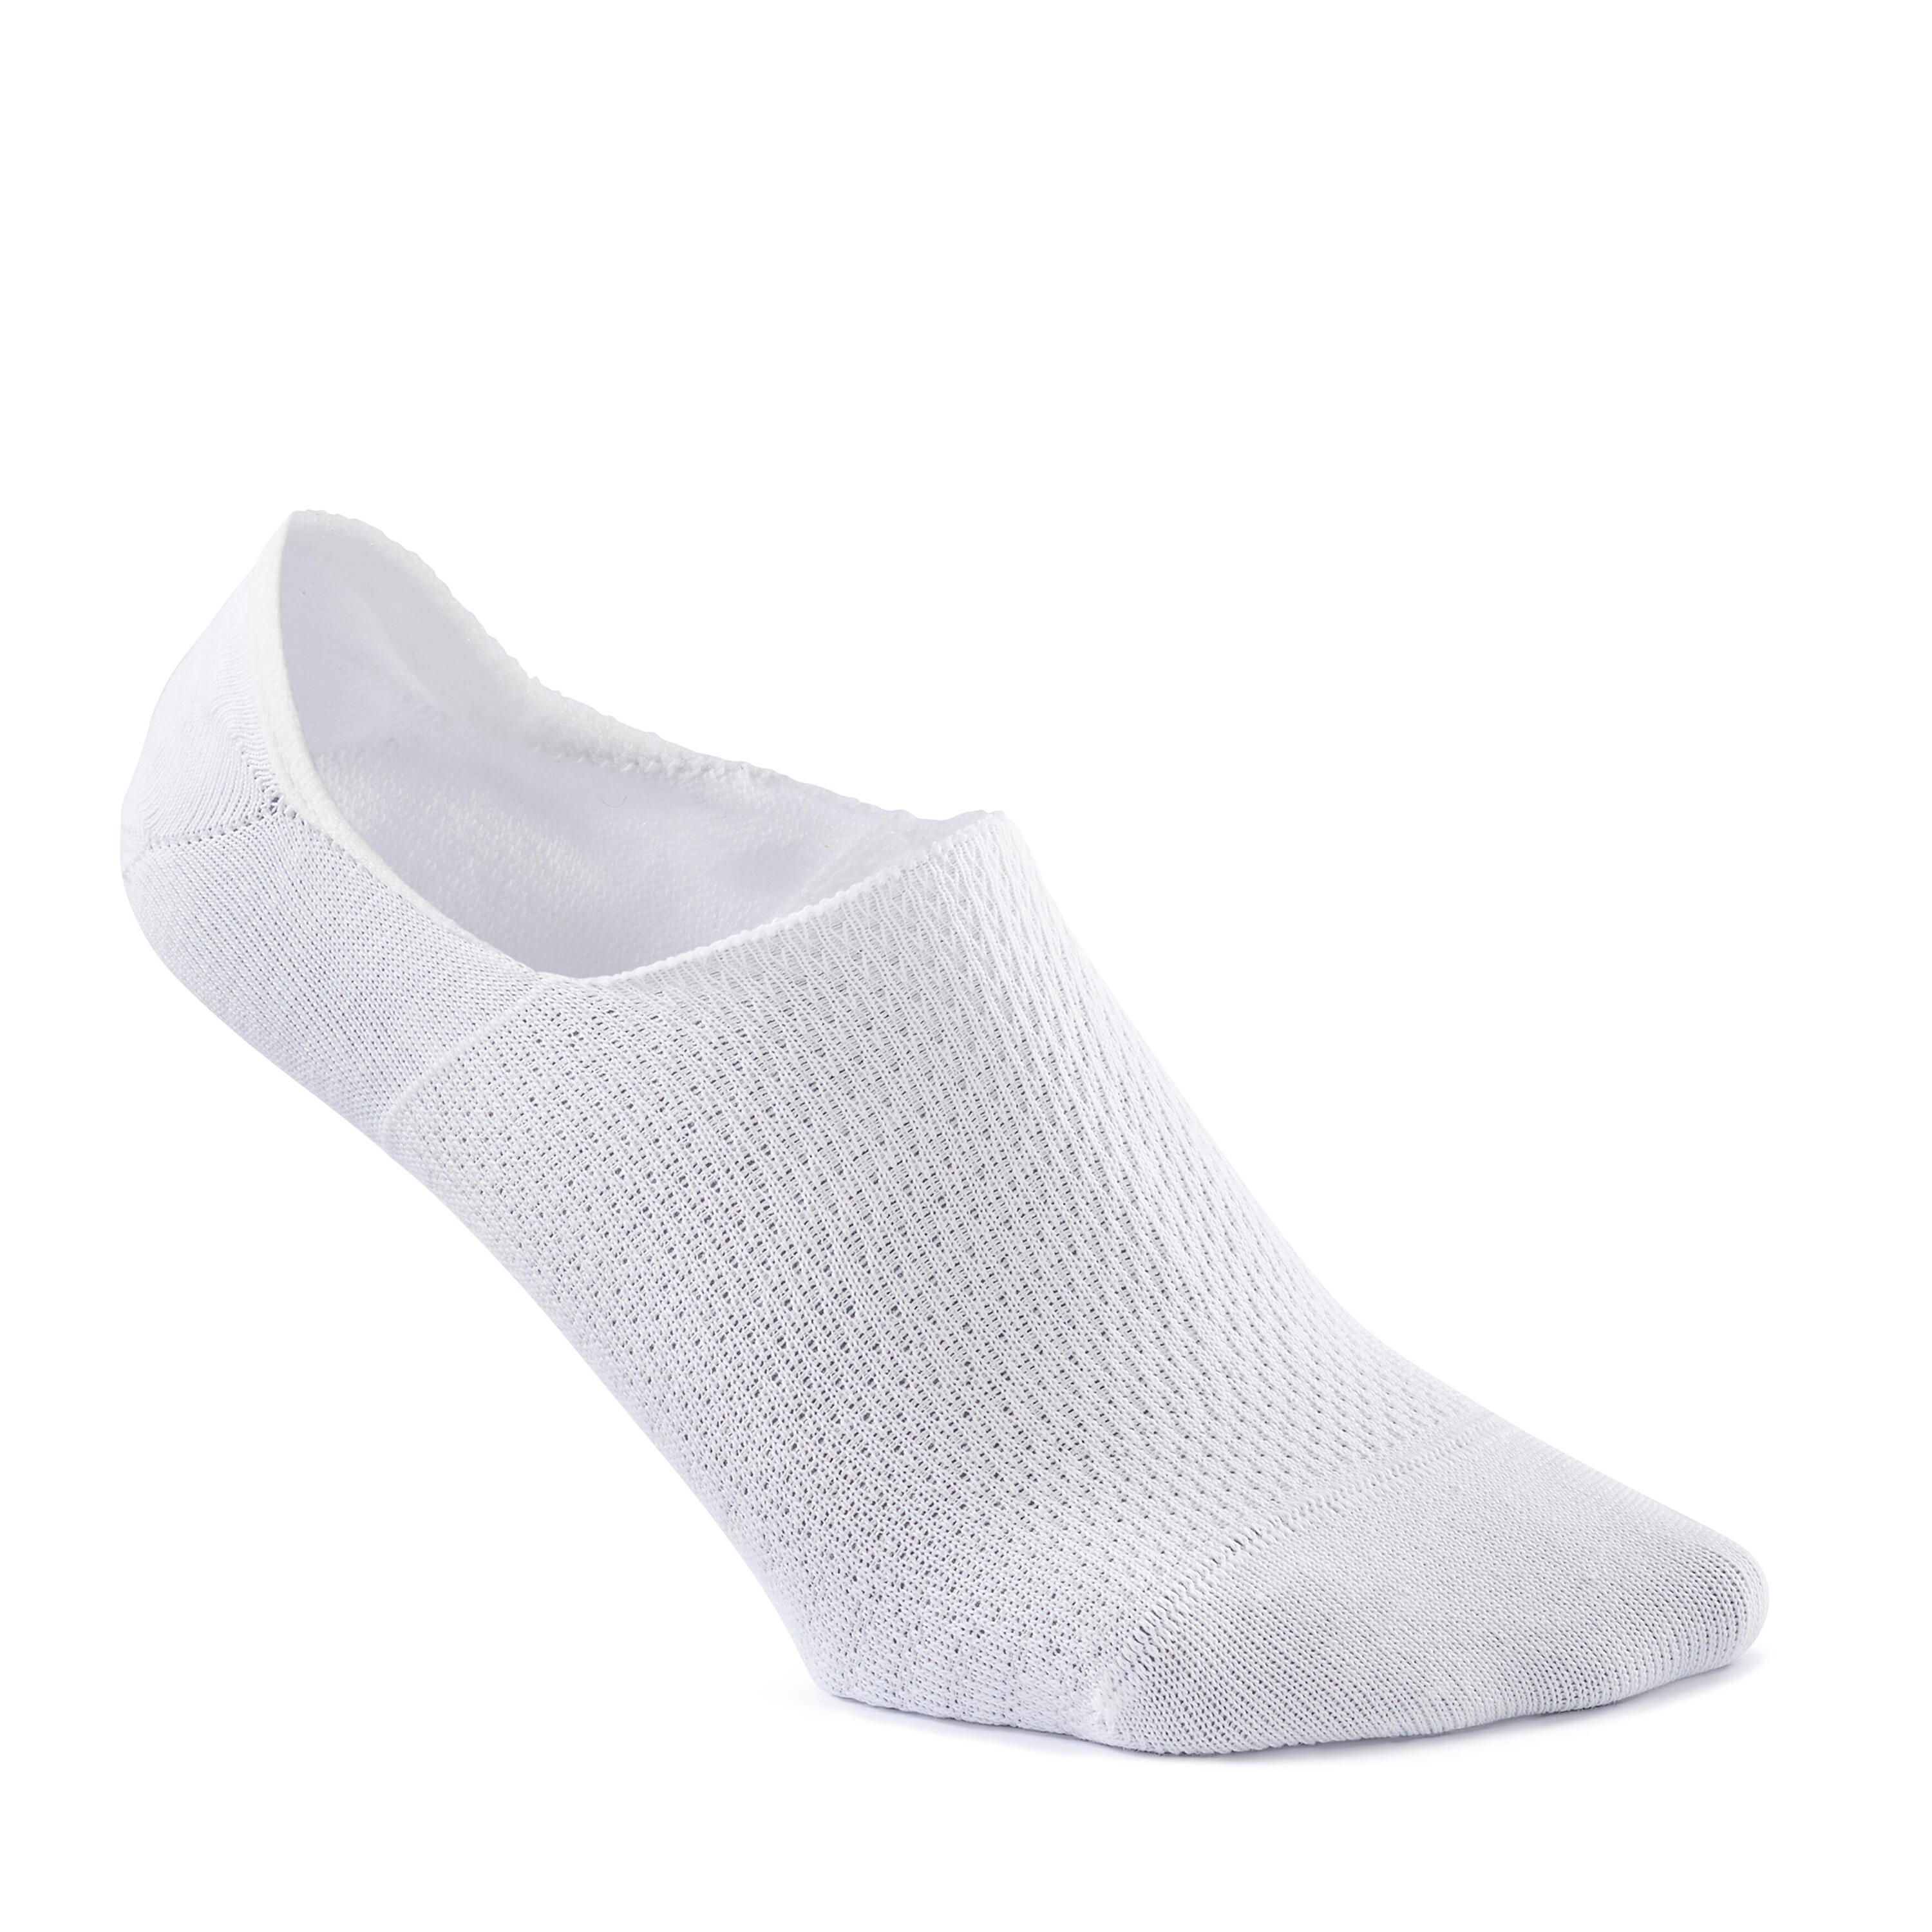 Invisible walking socks - pack of 2 pairs - white/grey 6/9